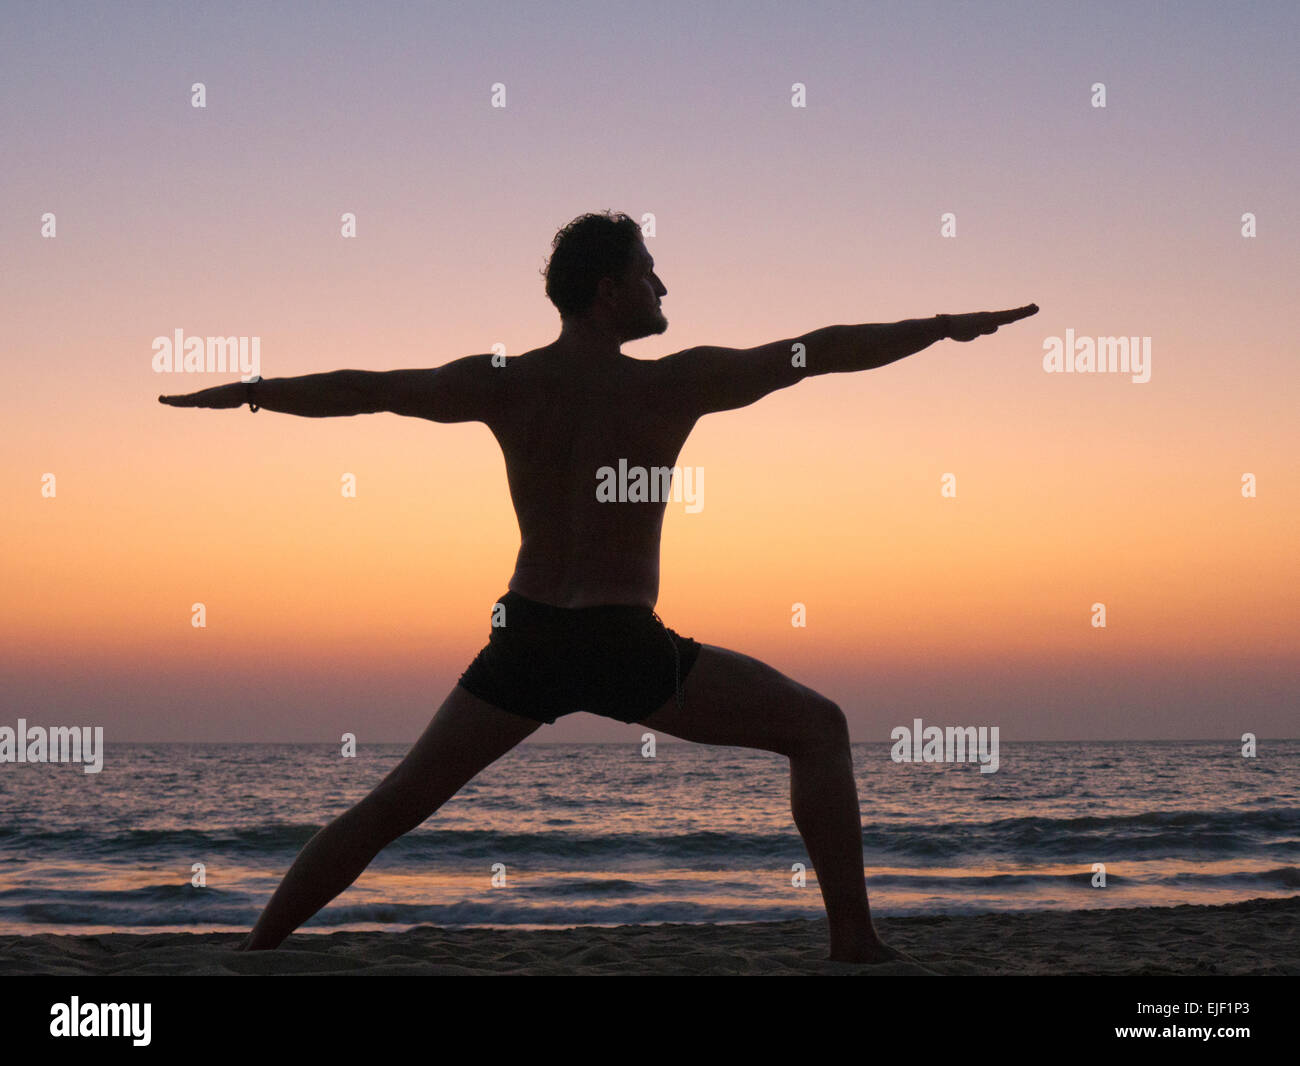 A man practicing yoga warrior pose on a beach Stock Photo